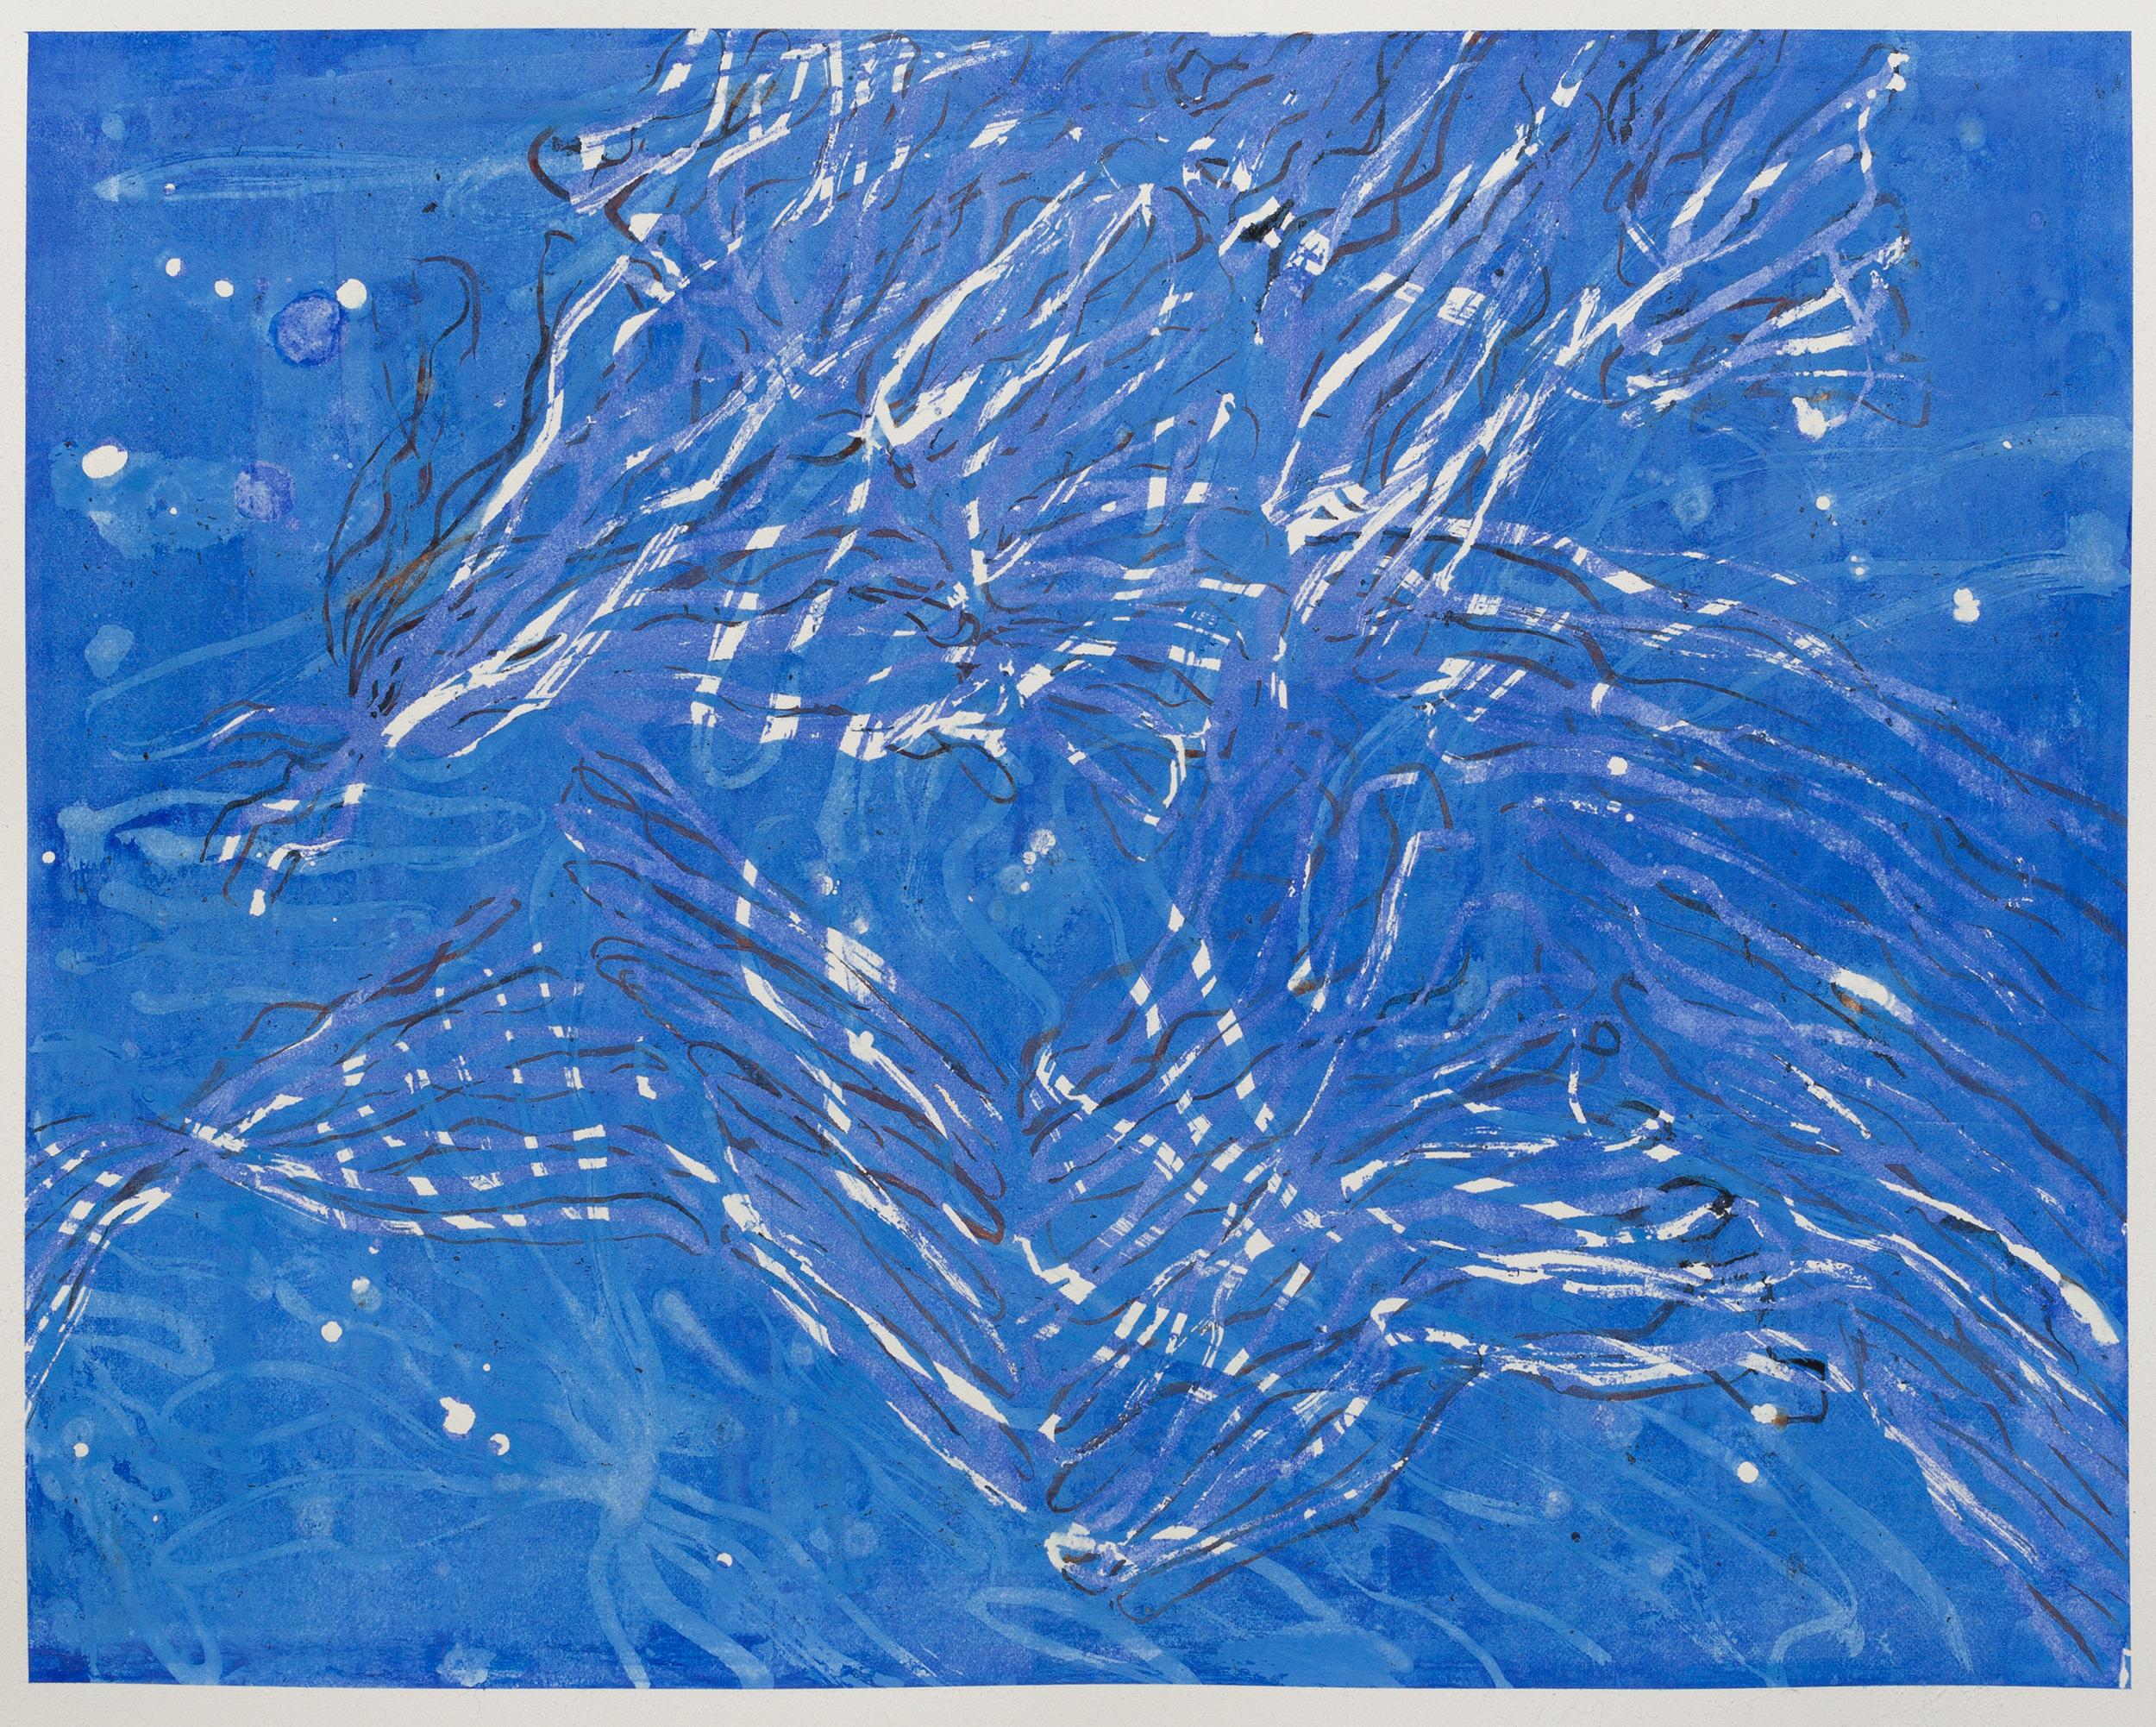 Current II -- contemporary abstract blue & white gestural painting of sea life